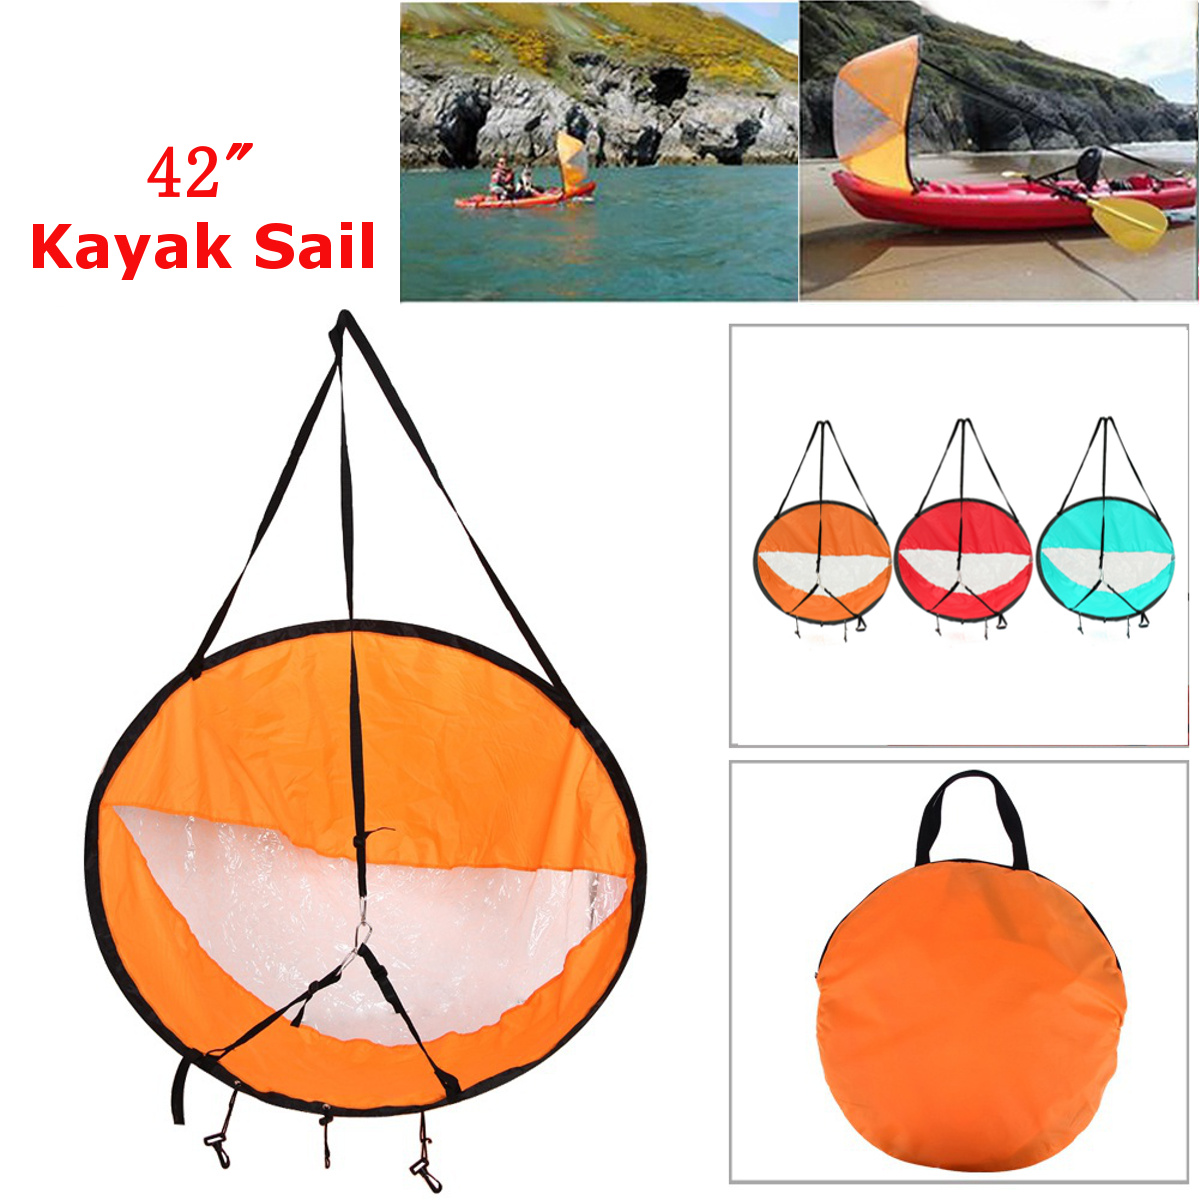 Kayak-Sail-Scout-Downwind-Wind-Paddle-Rowing-Inflatable-Boat-Popup-Canoe-Kayak-Accessories-1304233